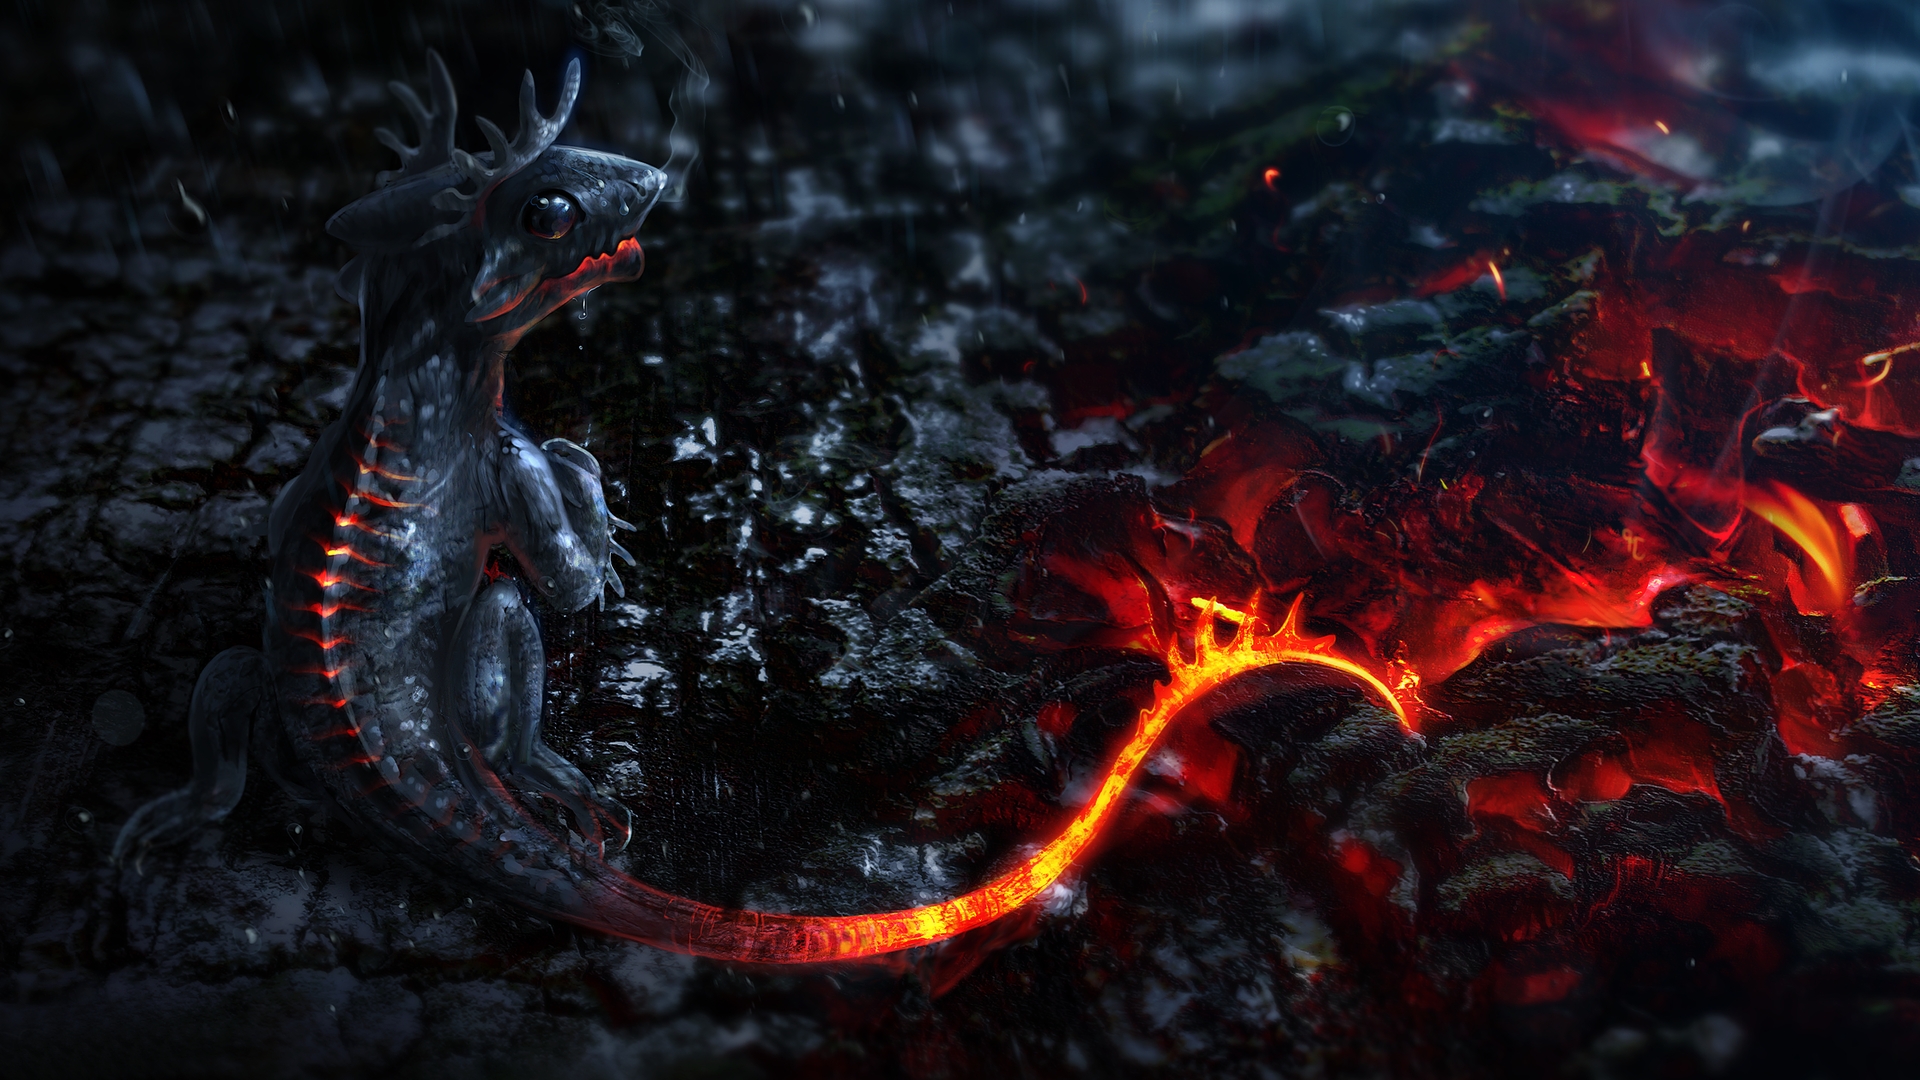 10 Latest Dragon Wallpaper Hd 1920X1080 FULL HD 1920×1080 For PC Background